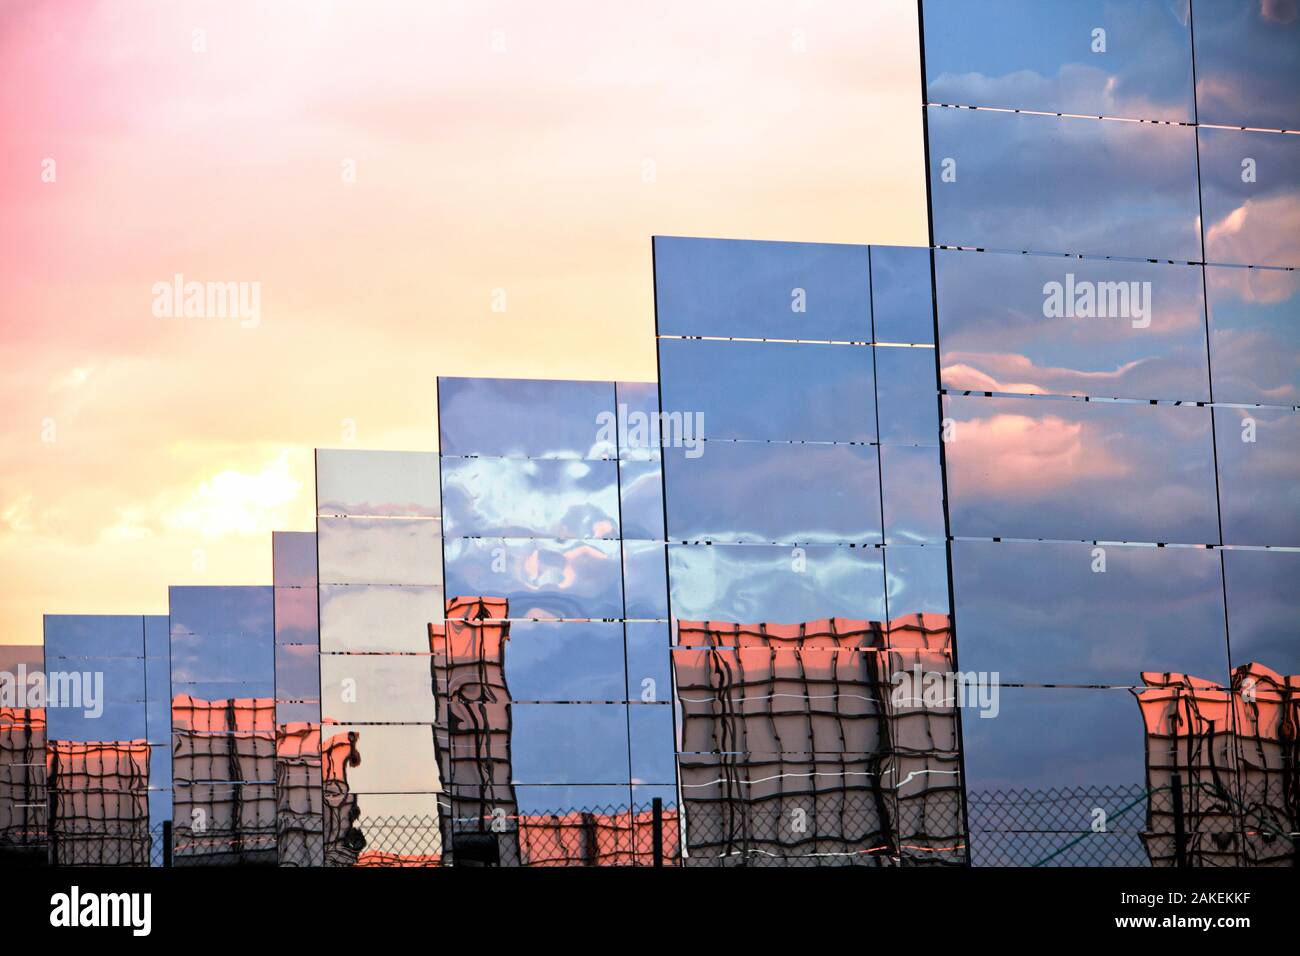 Heliostats, large reflective mirrors directing sunlight to the PS20 solar thermal tower, the only such working solar tower currently in the world. Sanlucar La Mayor, Andalucia, Spain. June 2011 Stock Photo